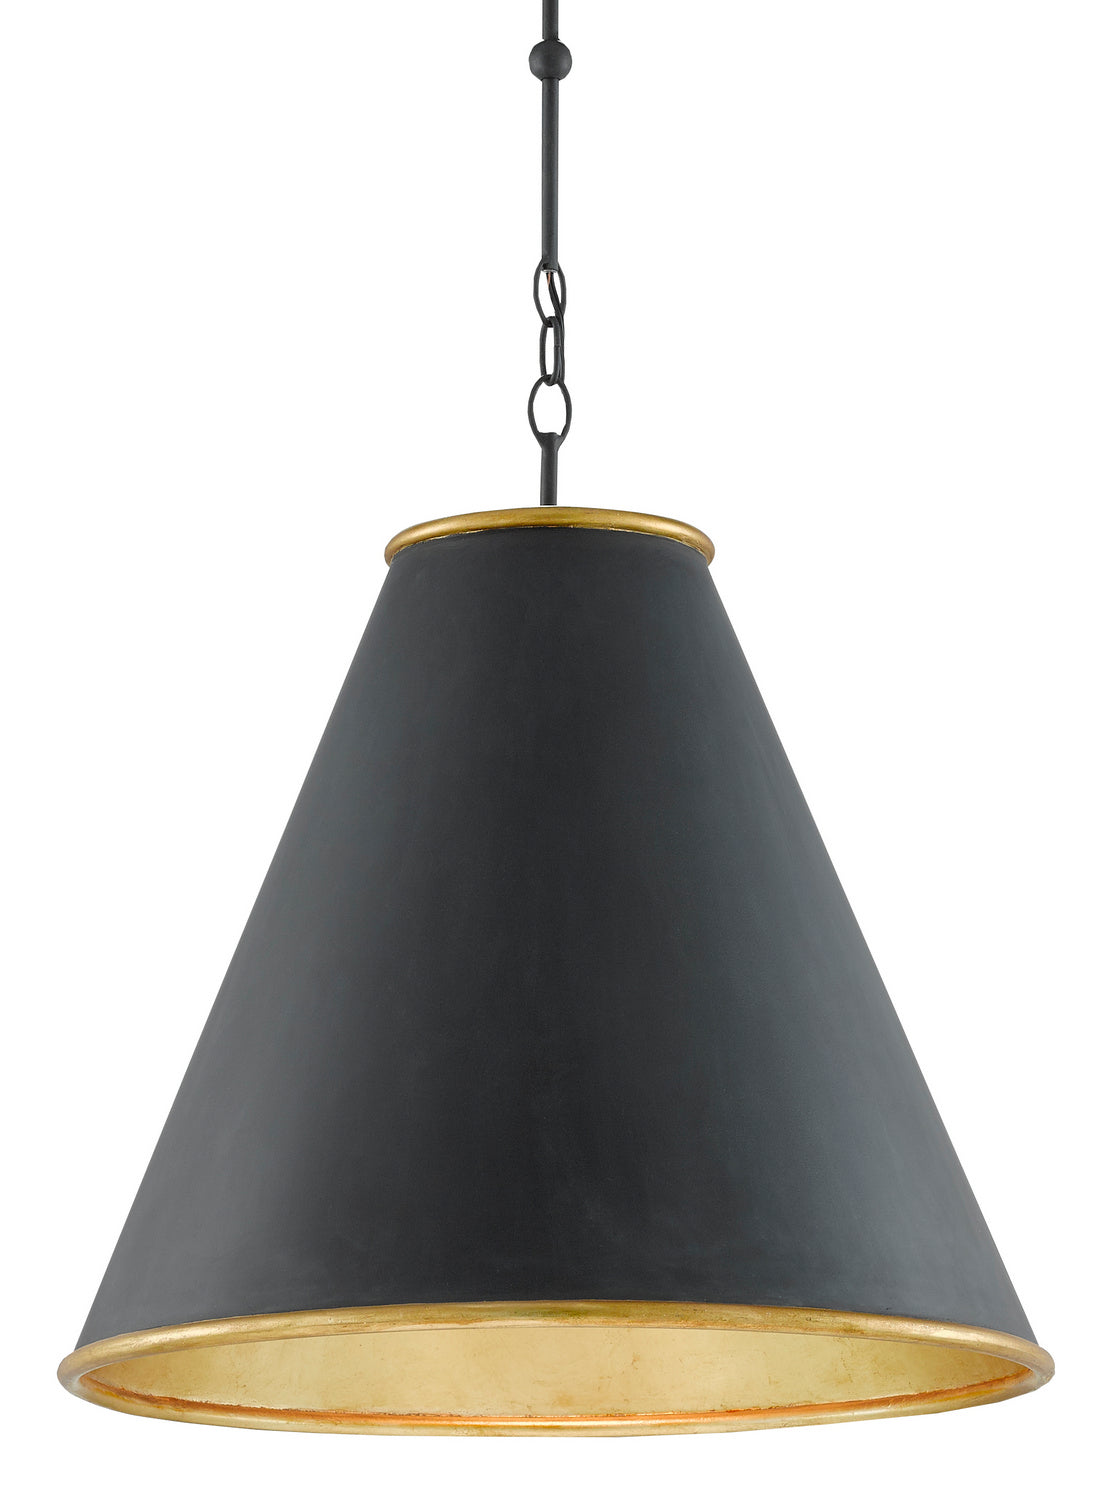 Currey and Company - One Light Pendant - Pierrepont - Antique Black/Contemporary Gold Leaf/Painted Gold- Union Lighting Luminaires Decor